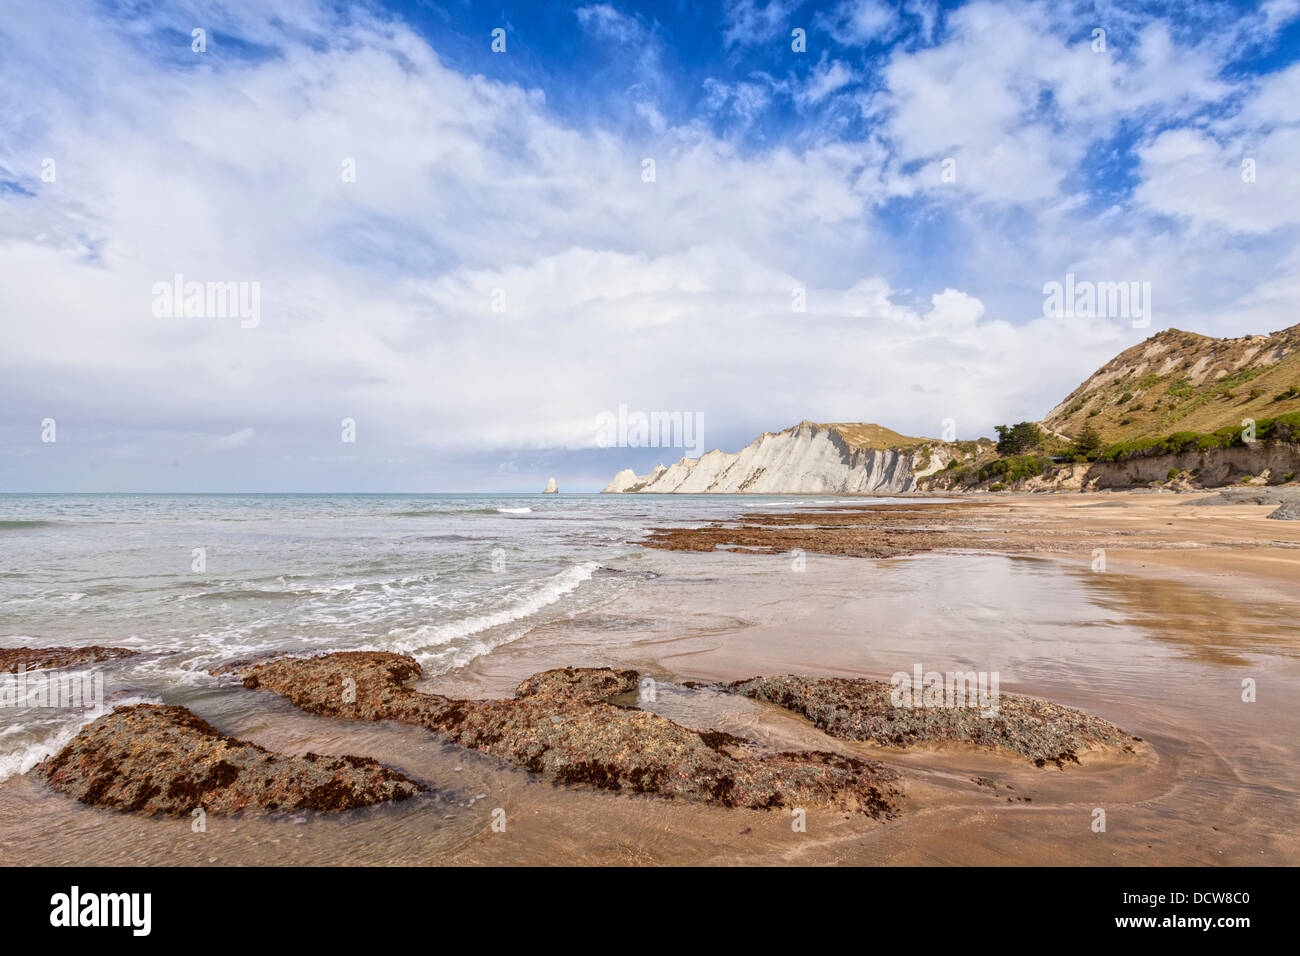 Beach at Cape Kidnappers, Hawke's Bay, New Zealand, famous for its gannet colony. Stock Photo